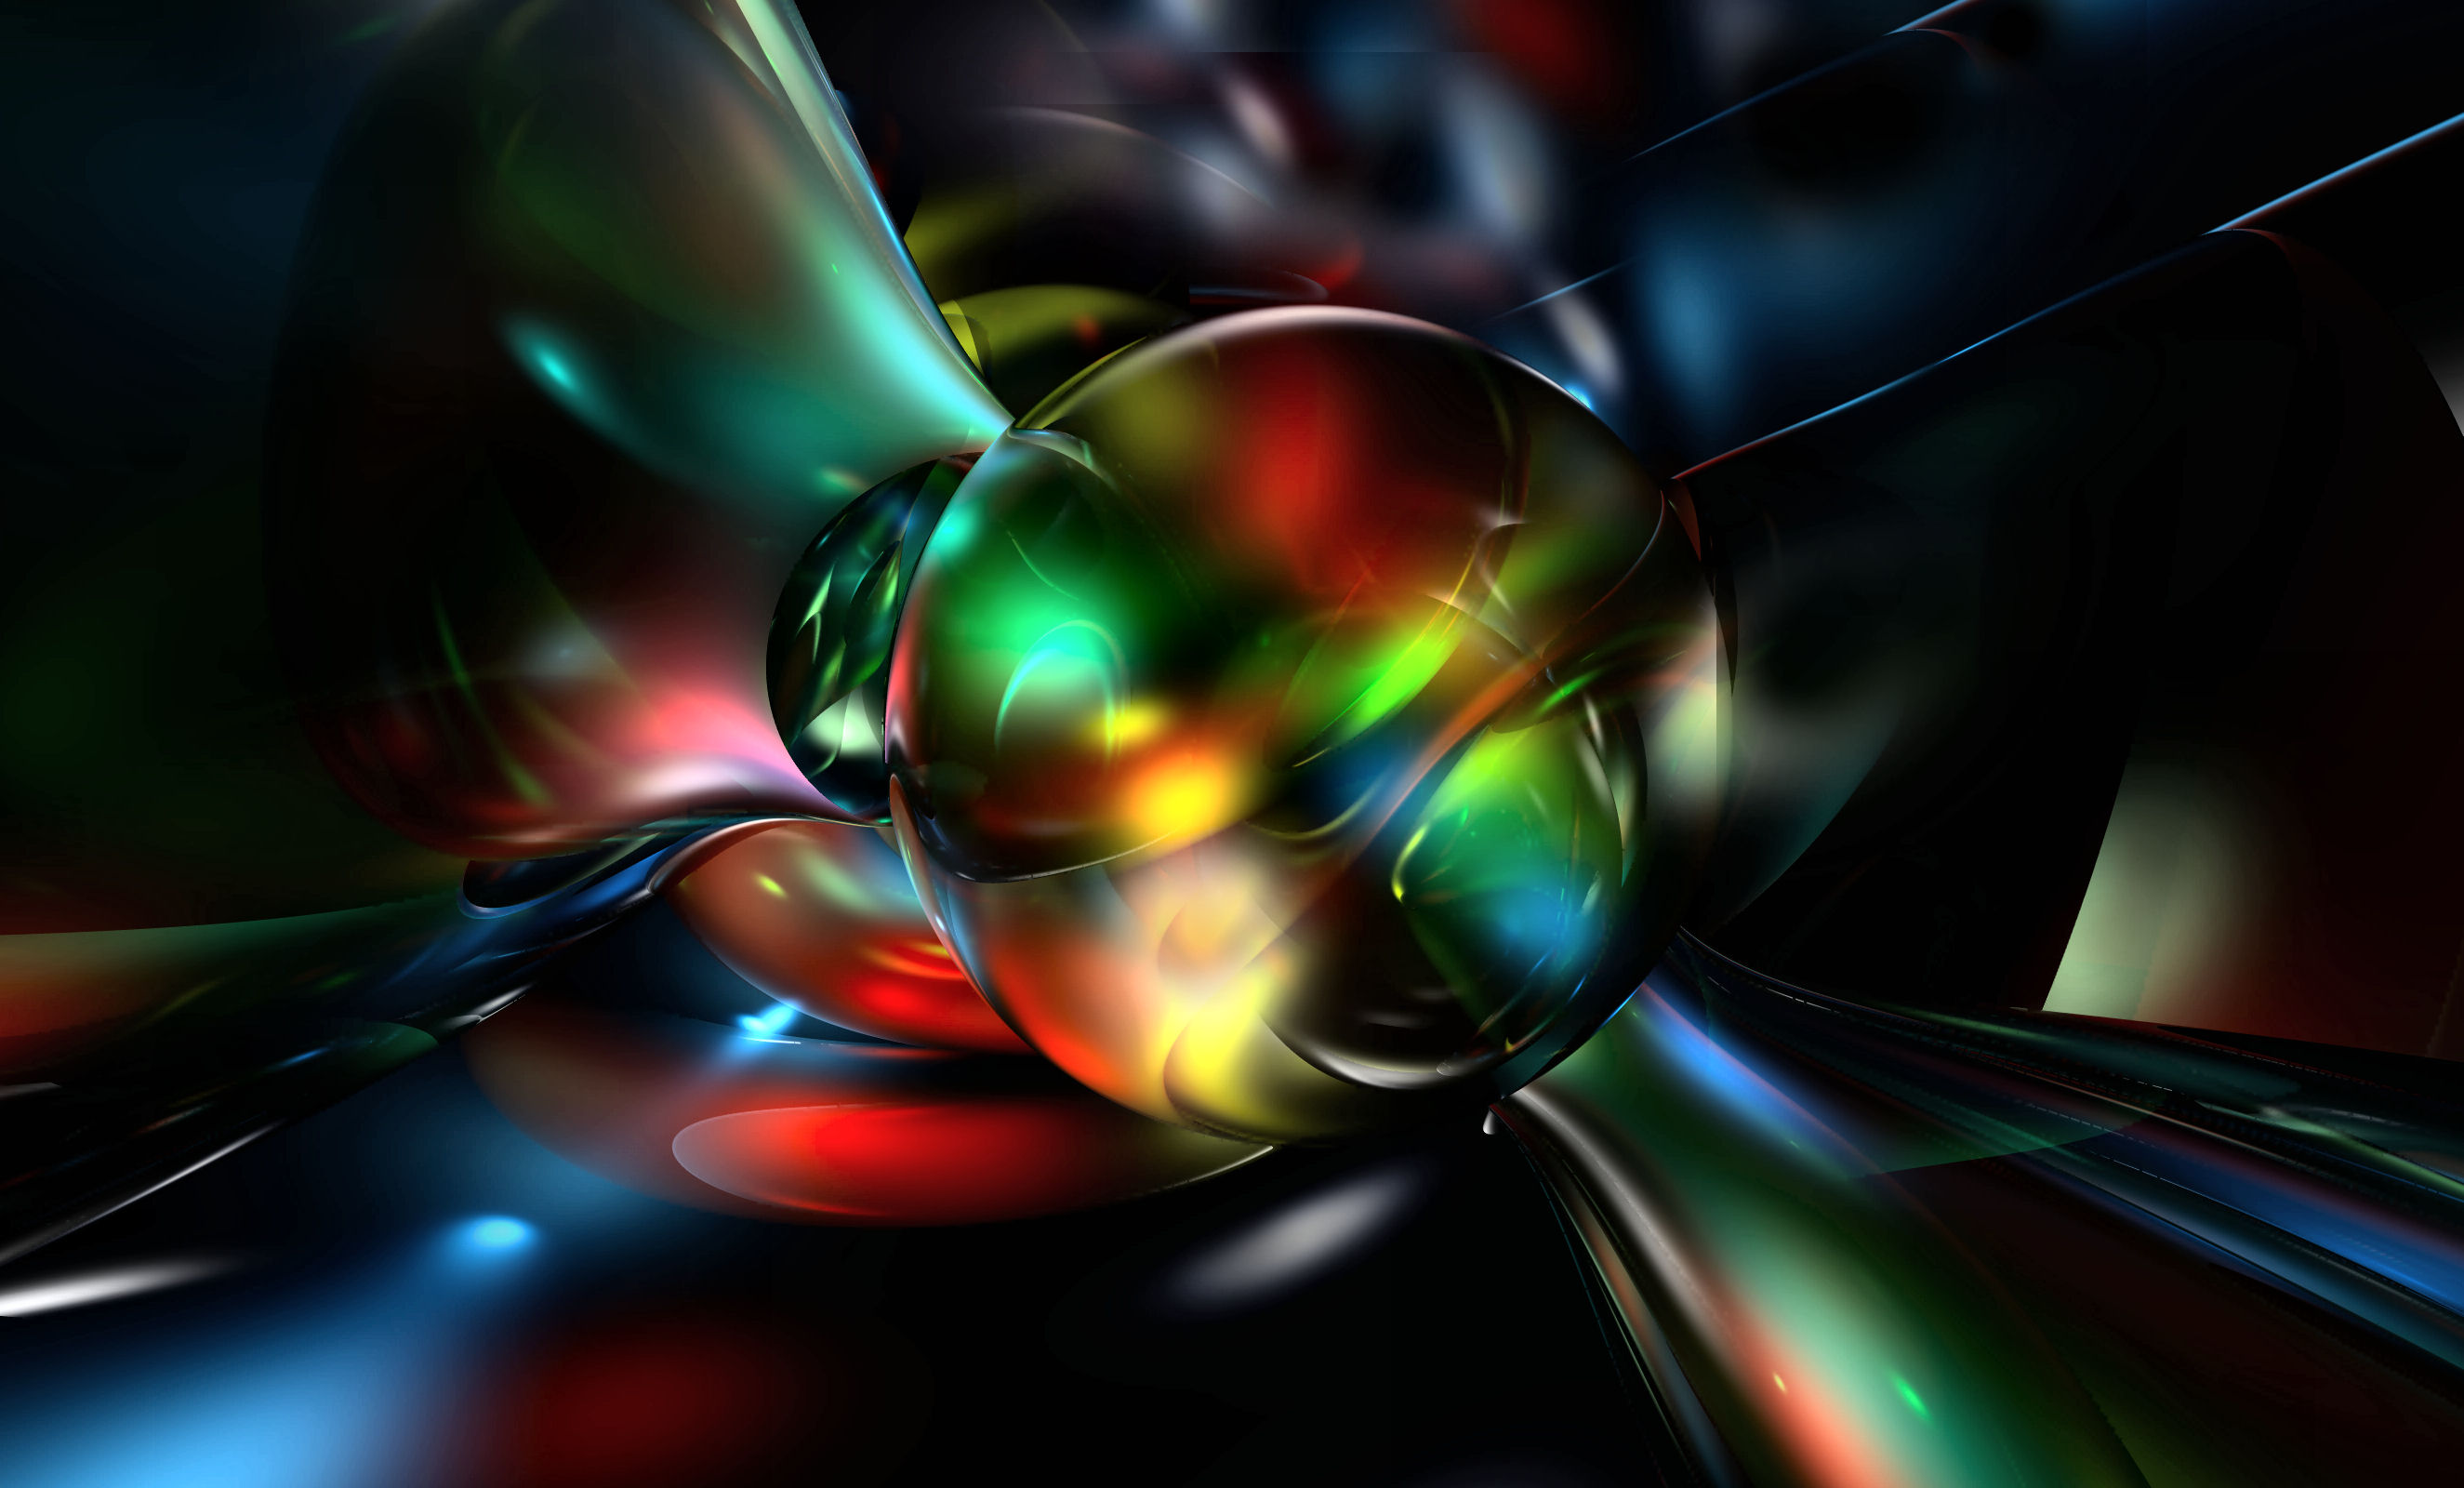 Related Pictures Really Cool Awesome Abstract 3d Desktop Wallpaper